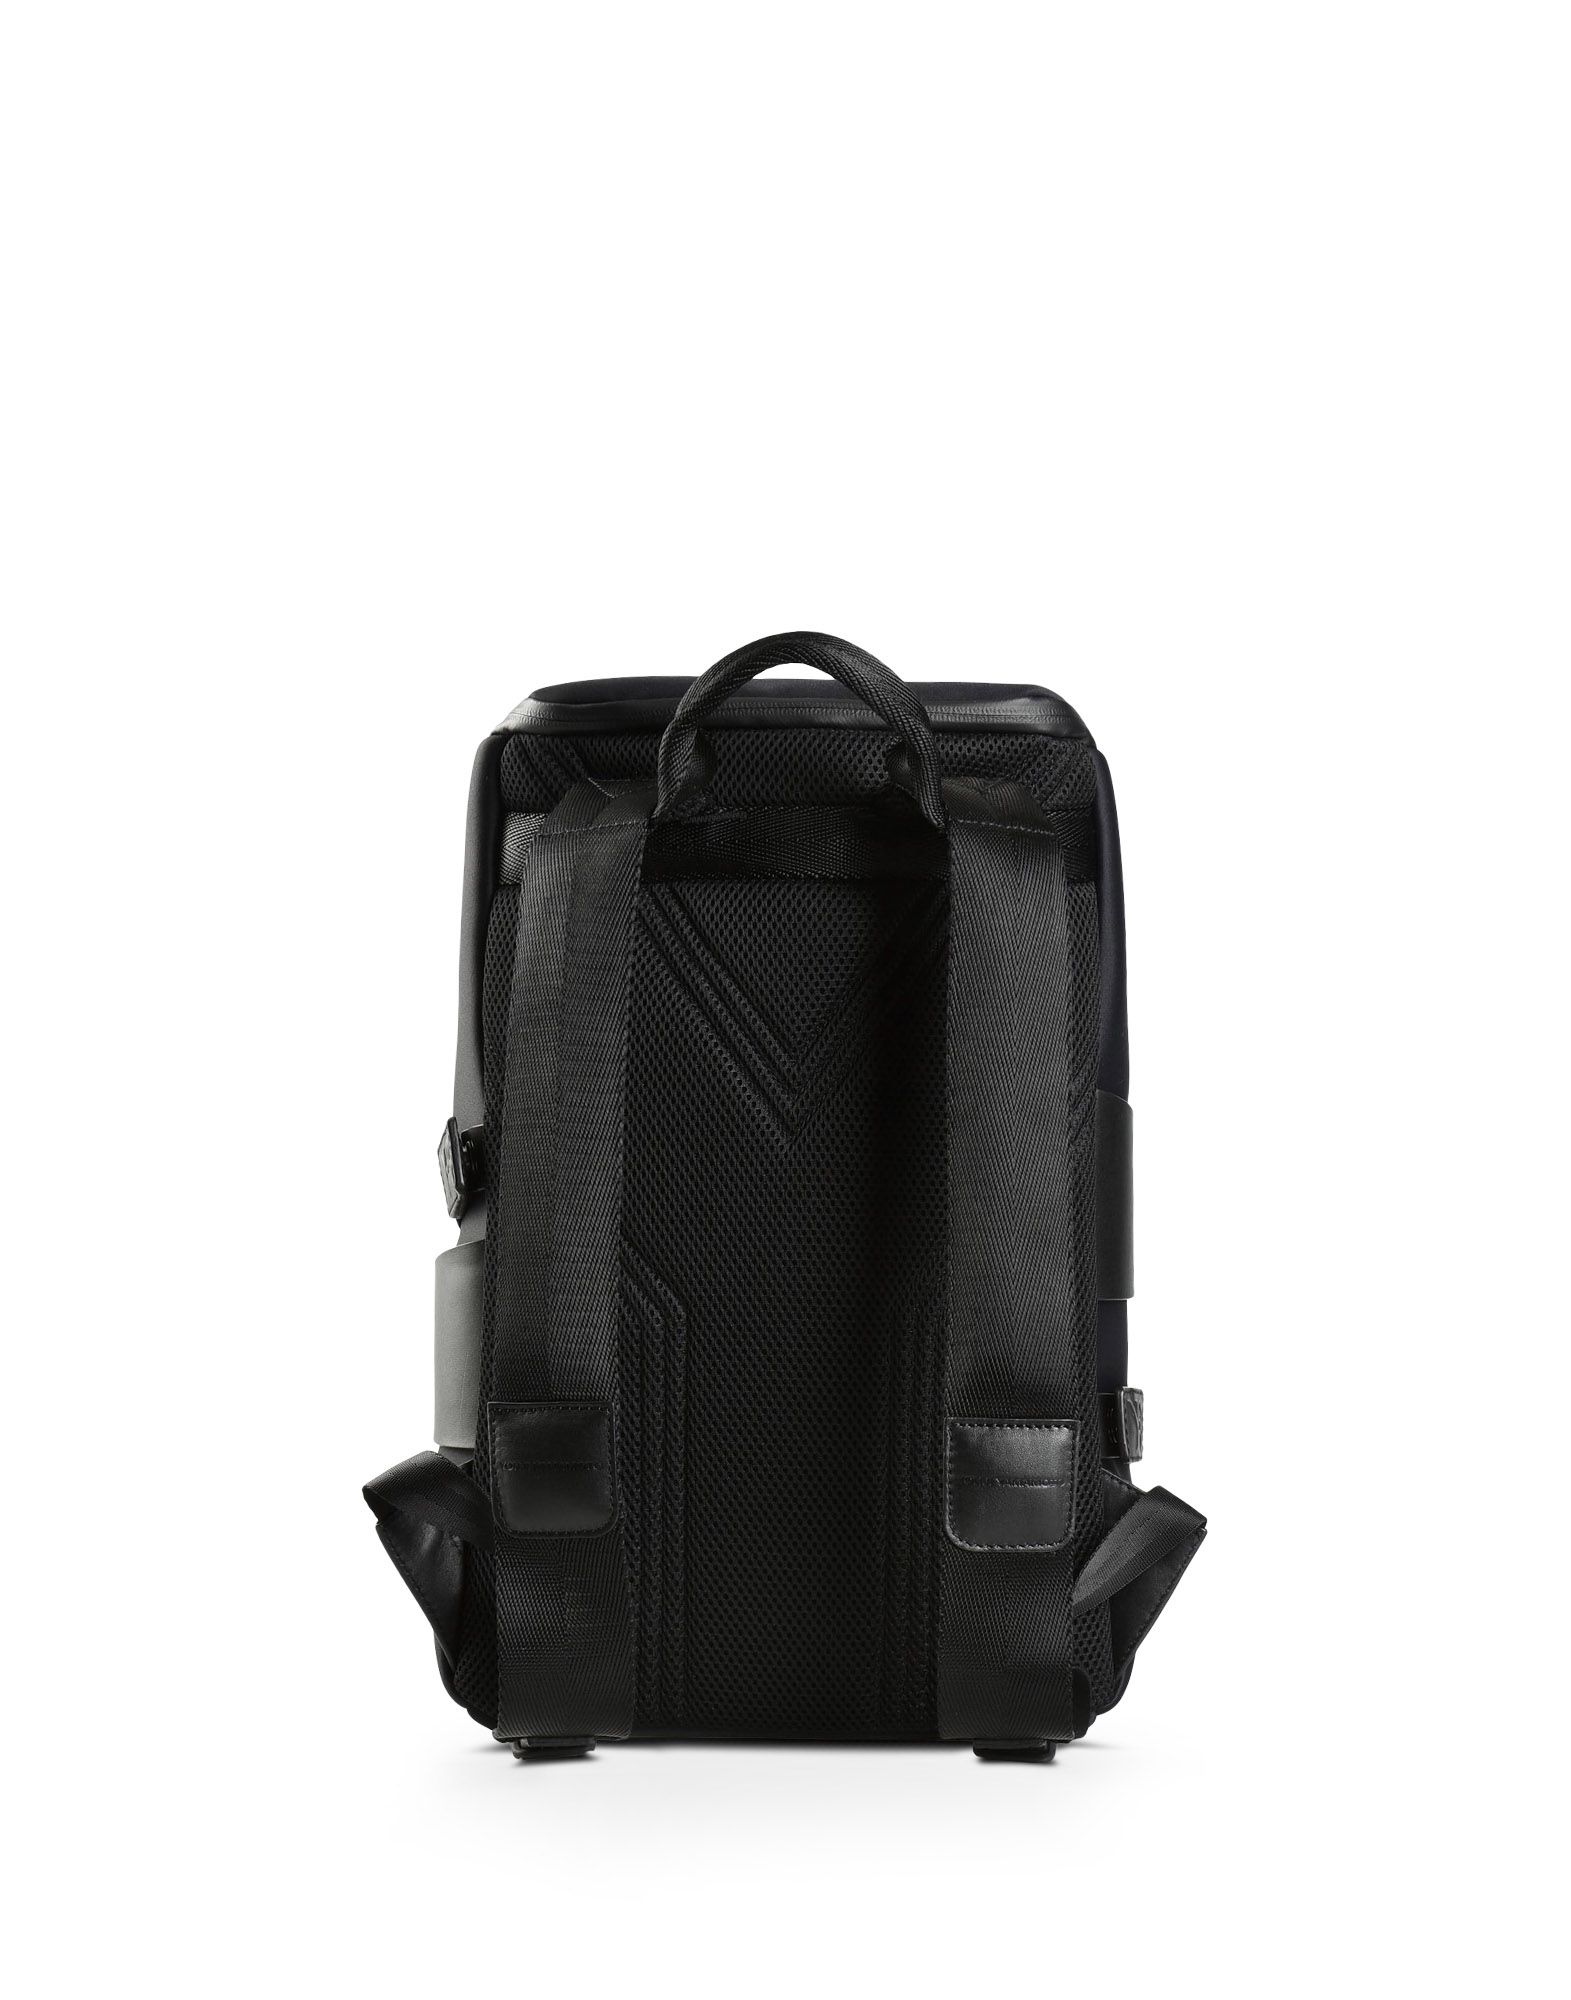 Y 3 QASA TECH BACKPACK for Women | Adidas Y-3 Official Store